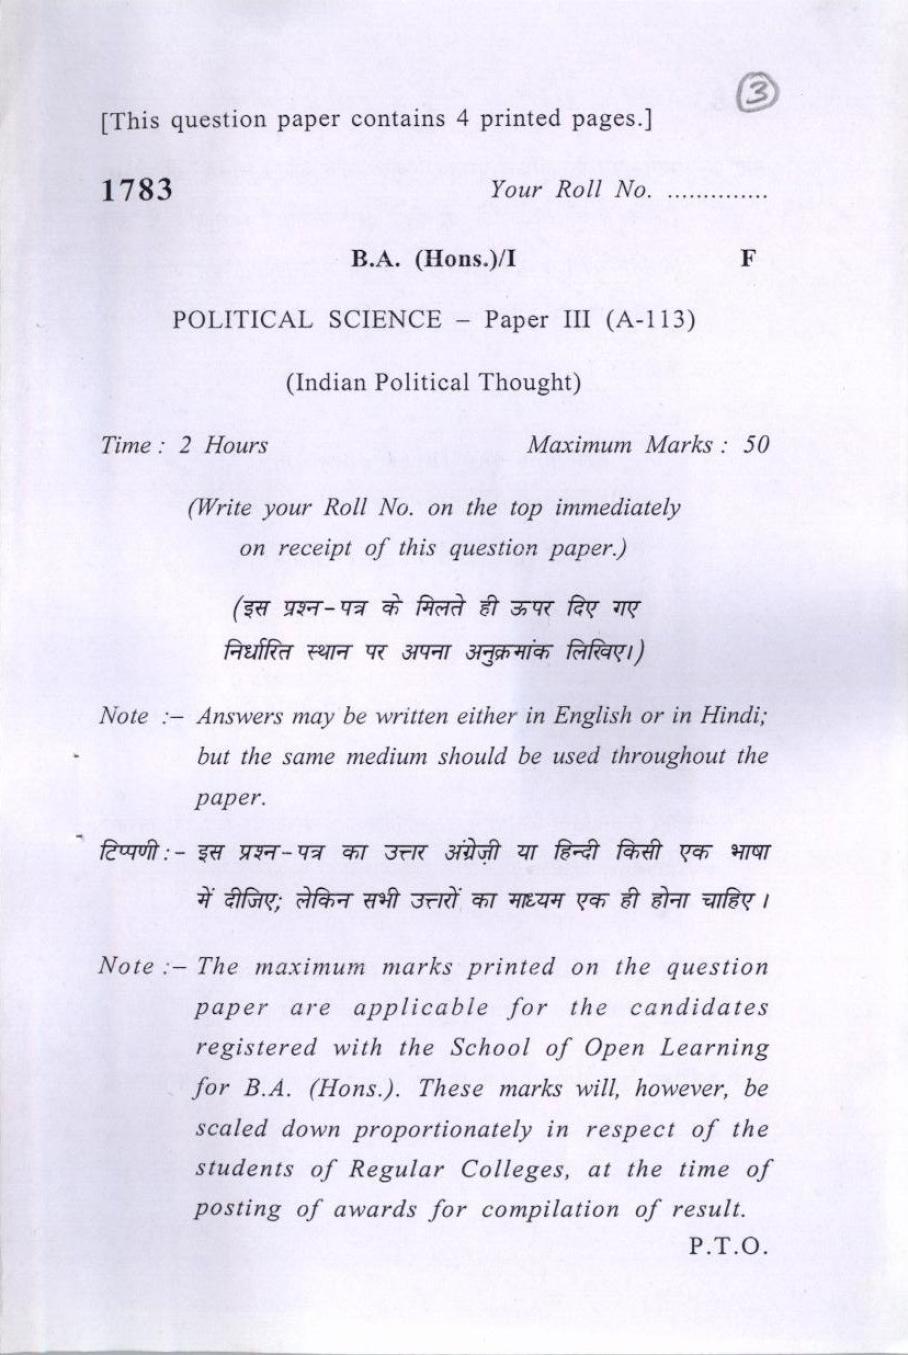 DU SOL Question Paper 2017 BA (Hons.) Political Science - Indian Political Thought - Page 1